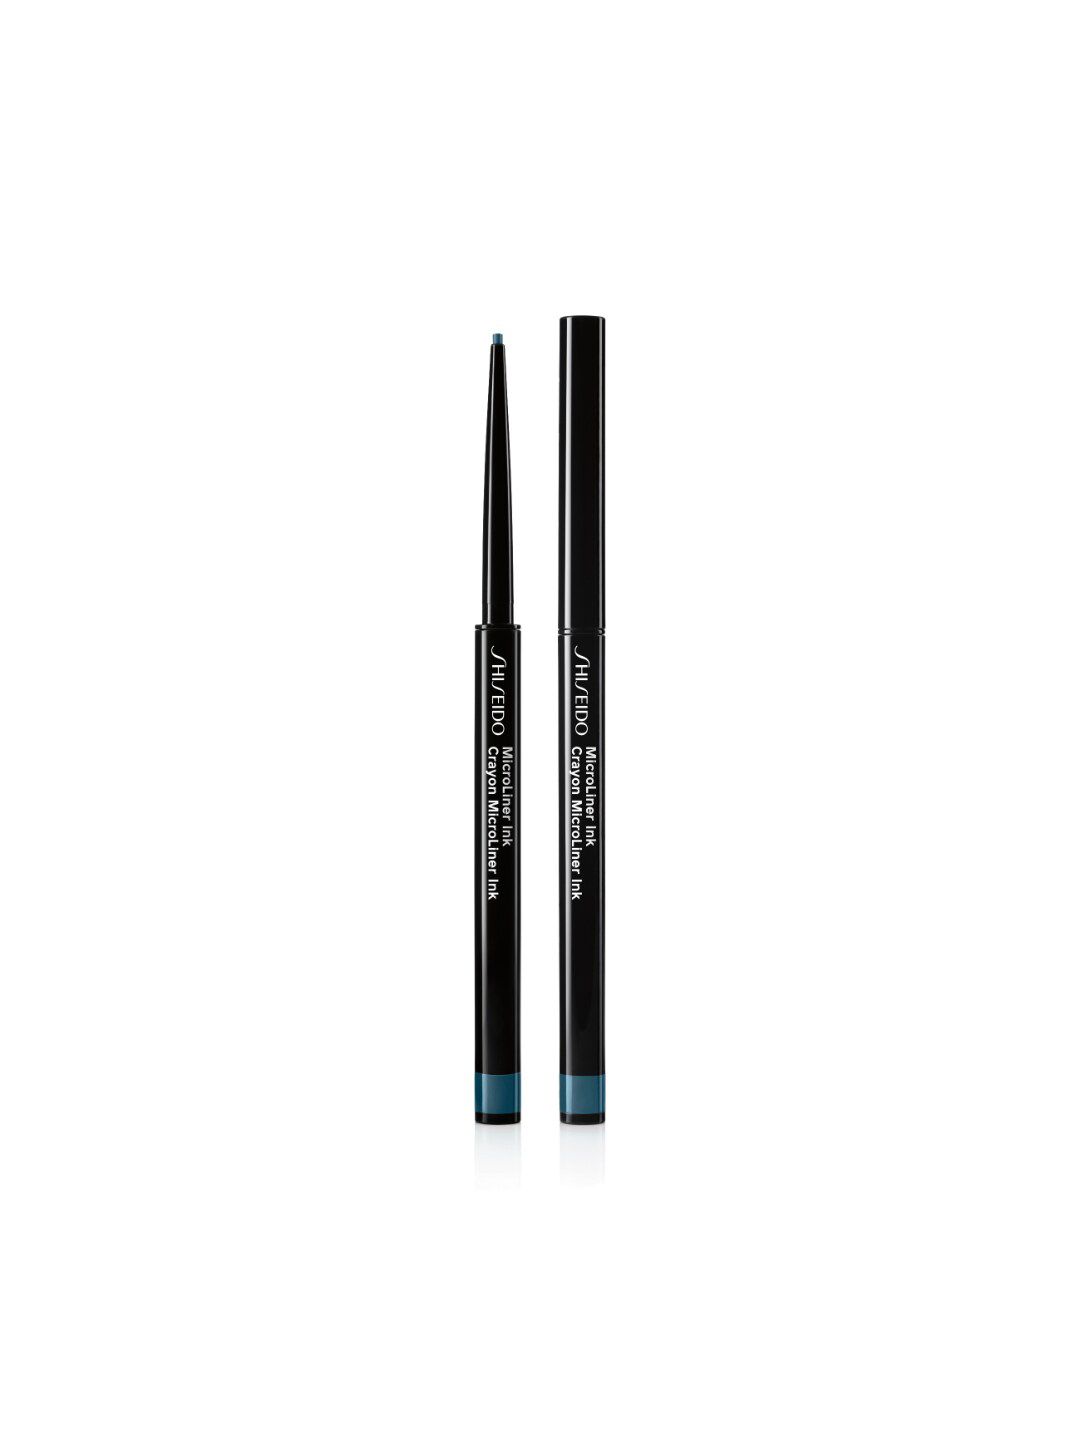 SHISEIDO Crayon MicroLiner Ink - Teal 08 Price in India